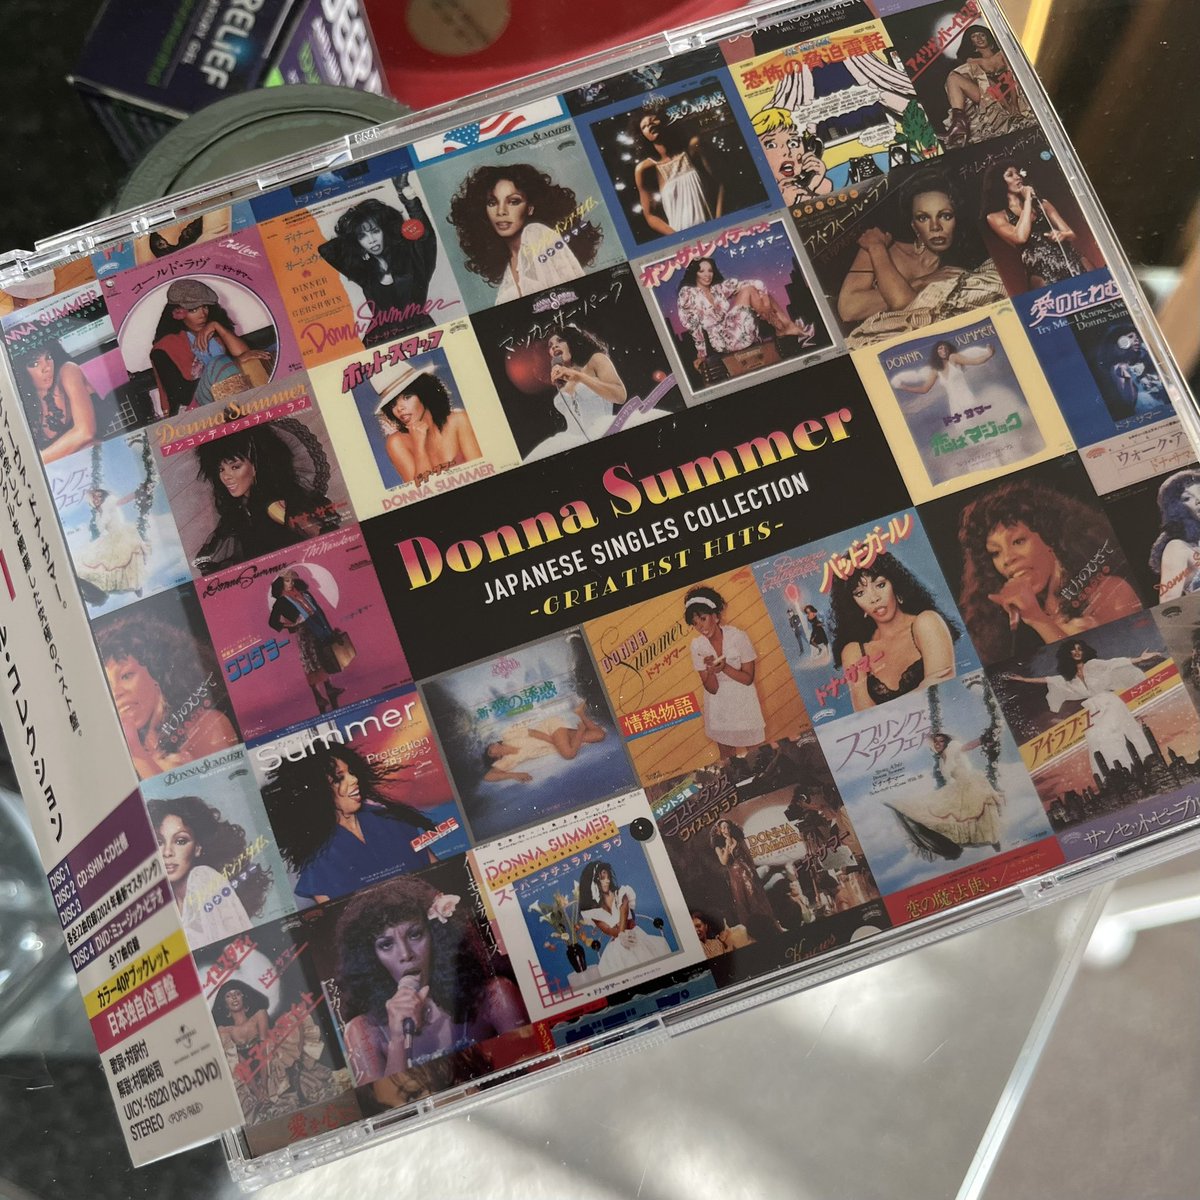 Now for a bit of #donnasummer 🕺🏼🕺🏼🕺🏼